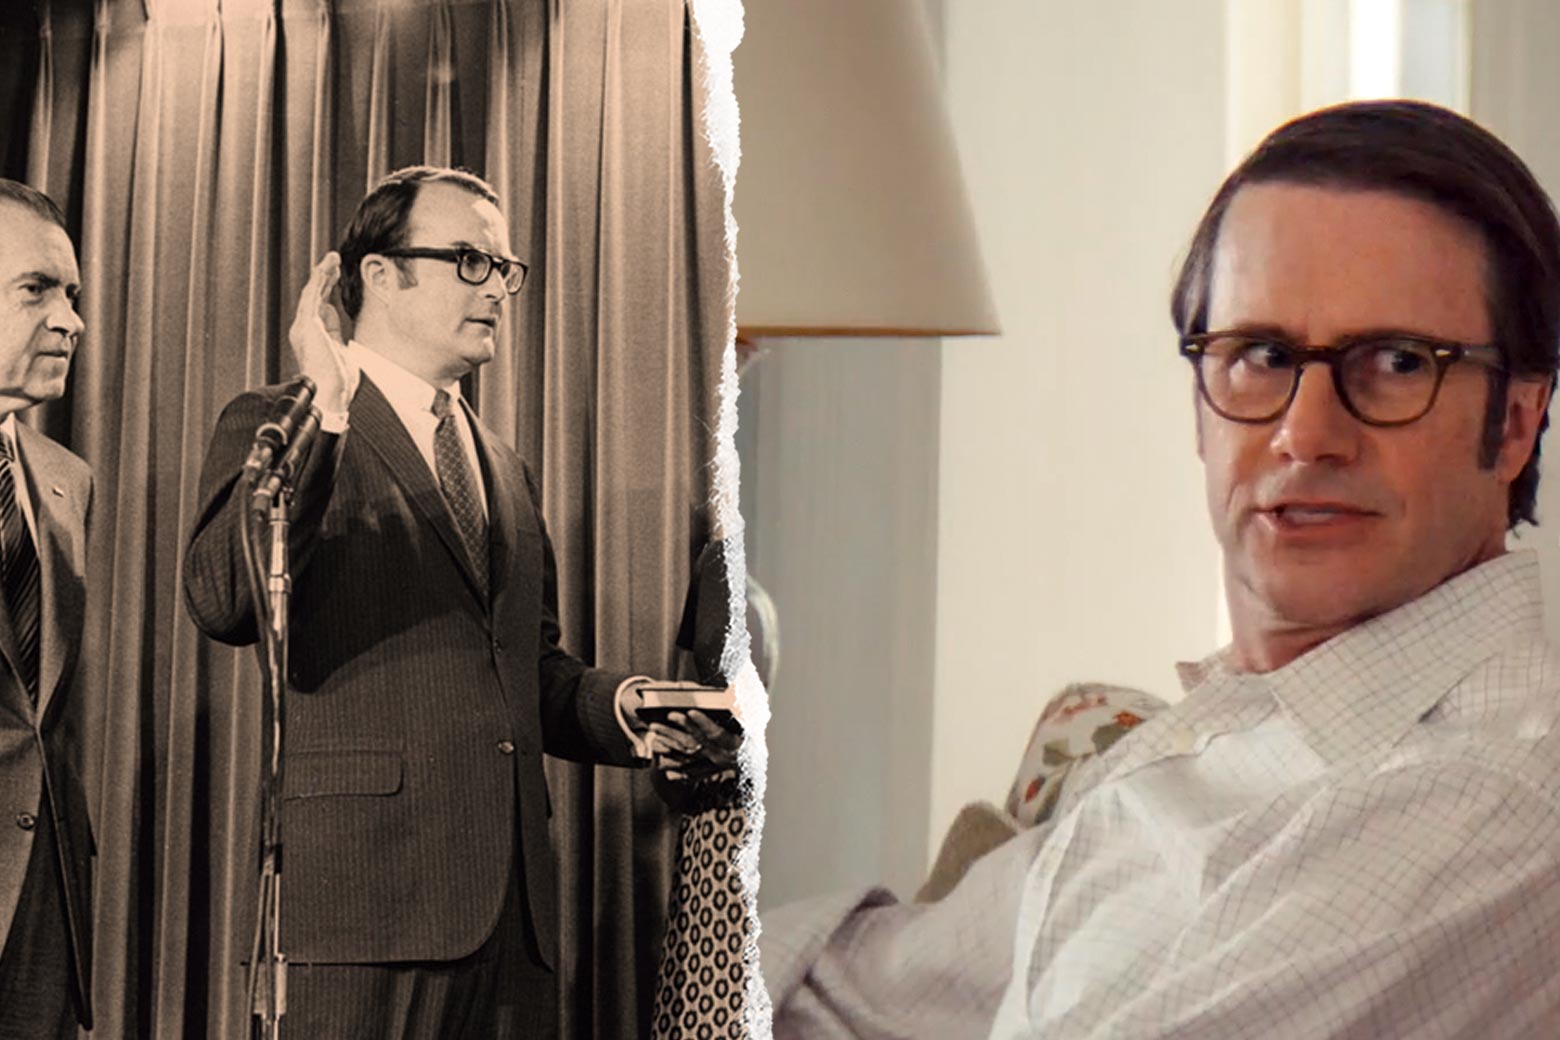 Side-by-side photos of William Ruckelshaus being sworn in and Josh Hamilton as William Ruckelshaus.